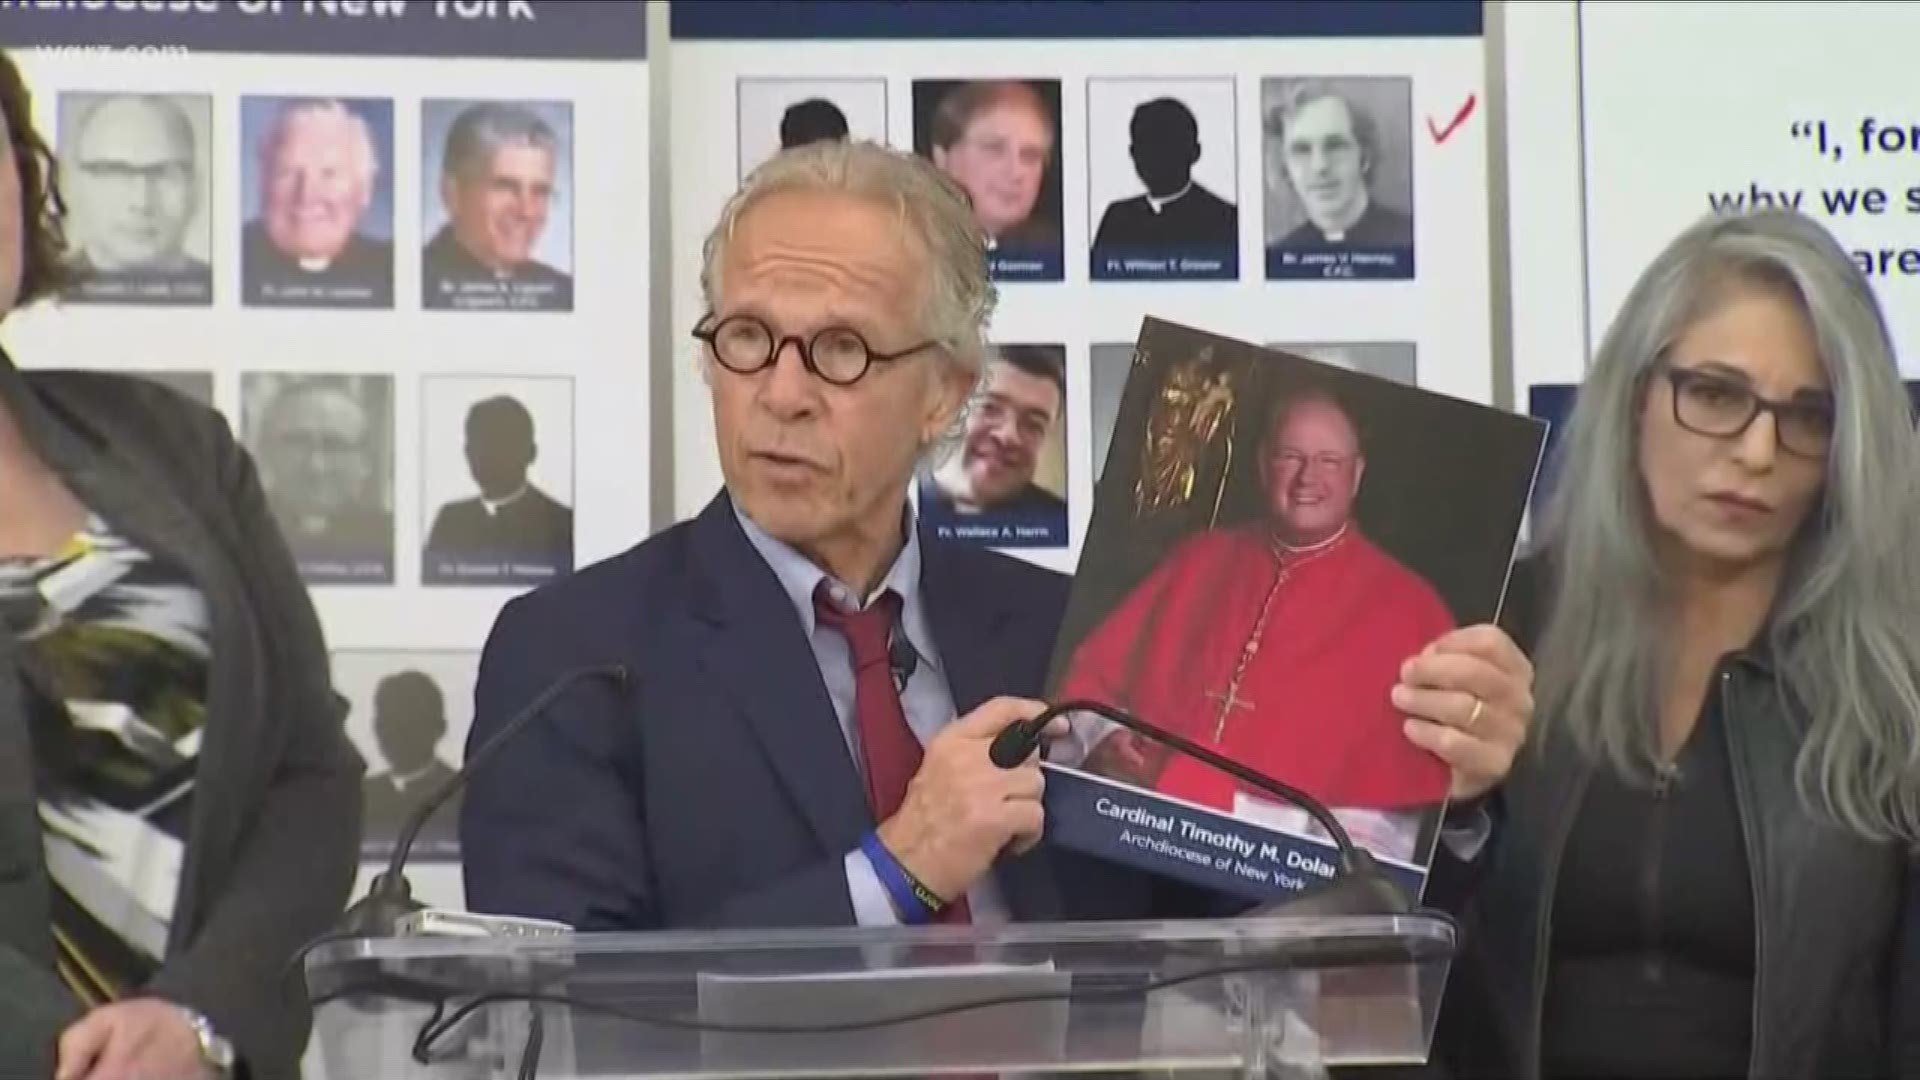 Cardinal Timothy Dolan refuses to release it because quote "the names are already out there"